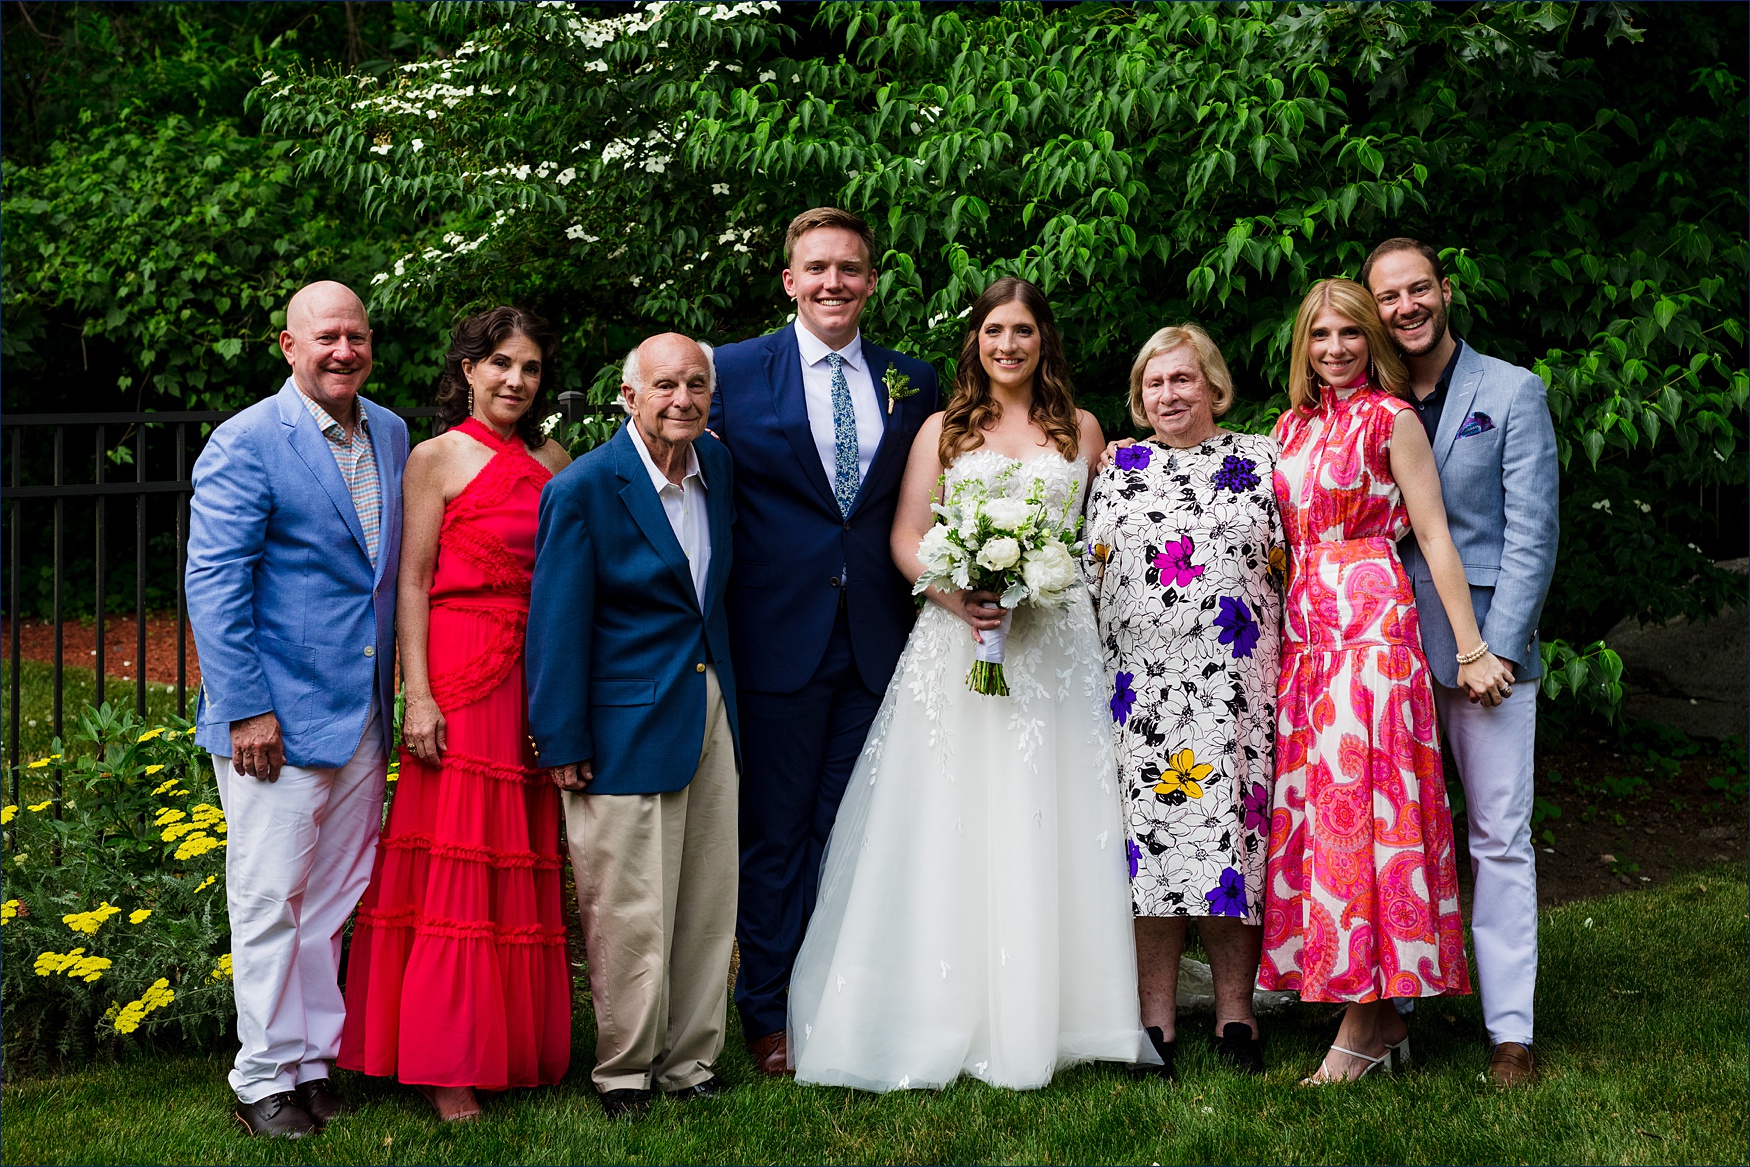 The family on the wedding day in their backyard for the intimate wedding celebration 